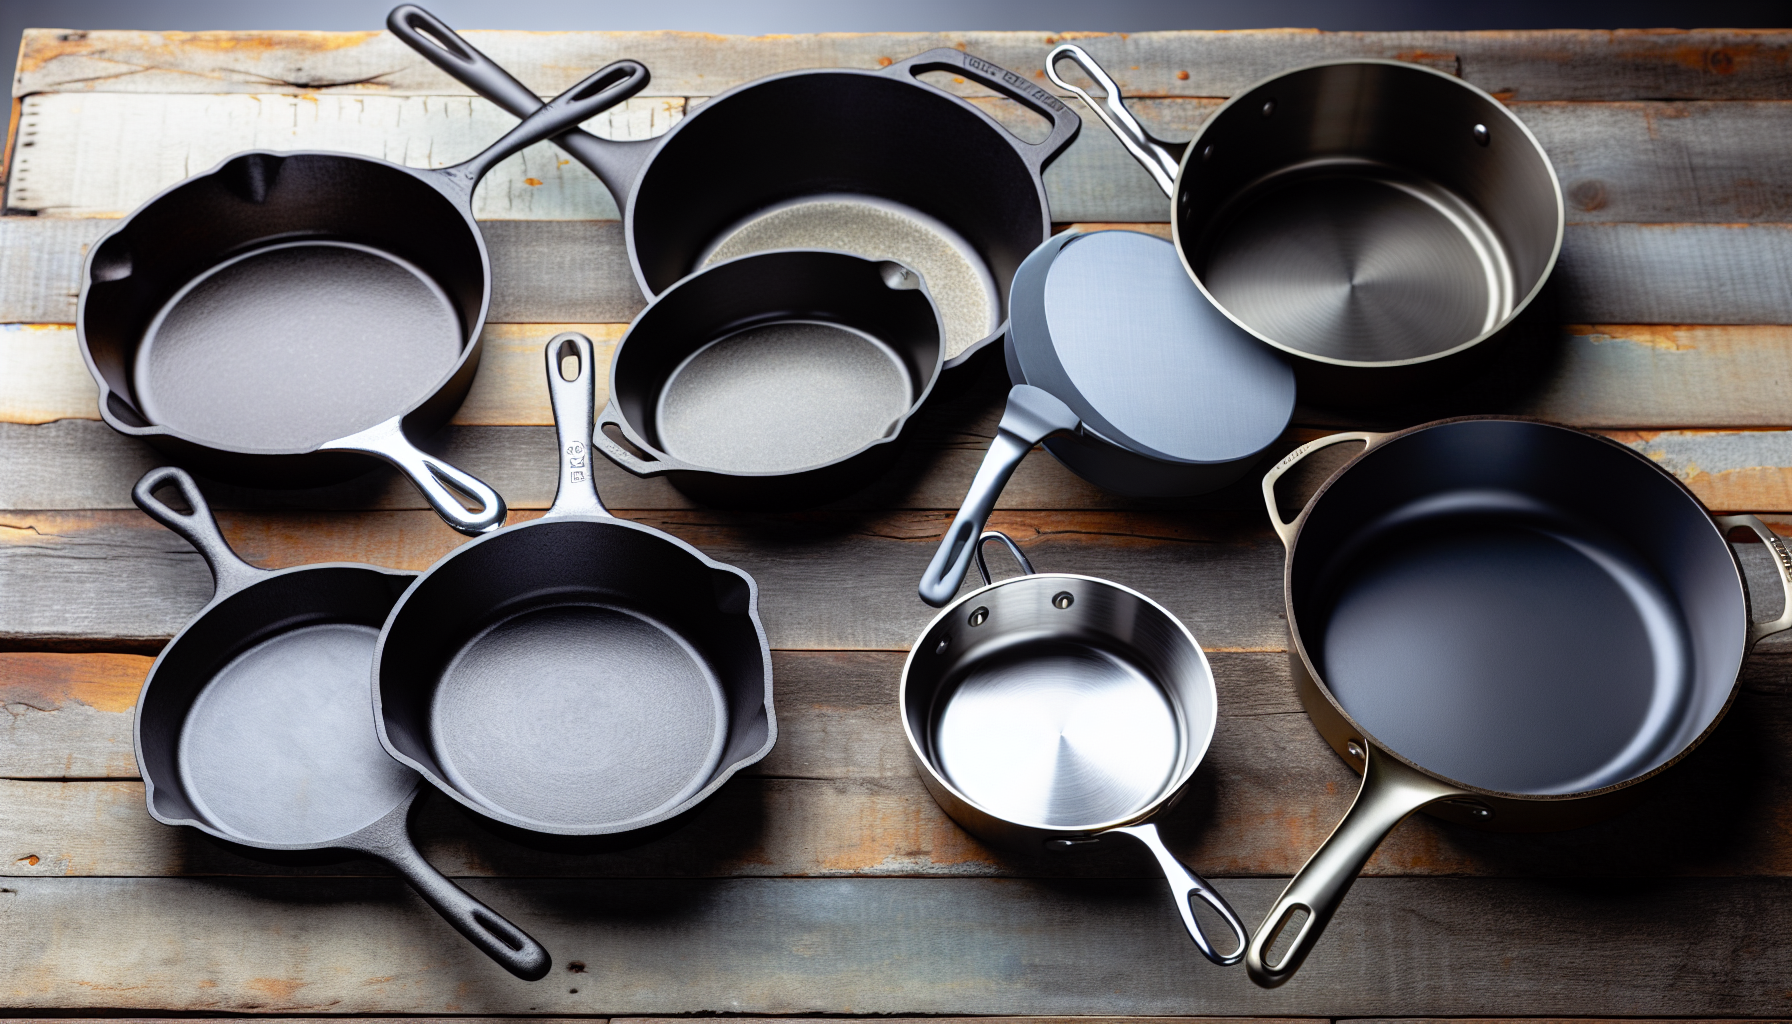 A collection of cast iron, stainless steel, and non-stick skillets arranged together